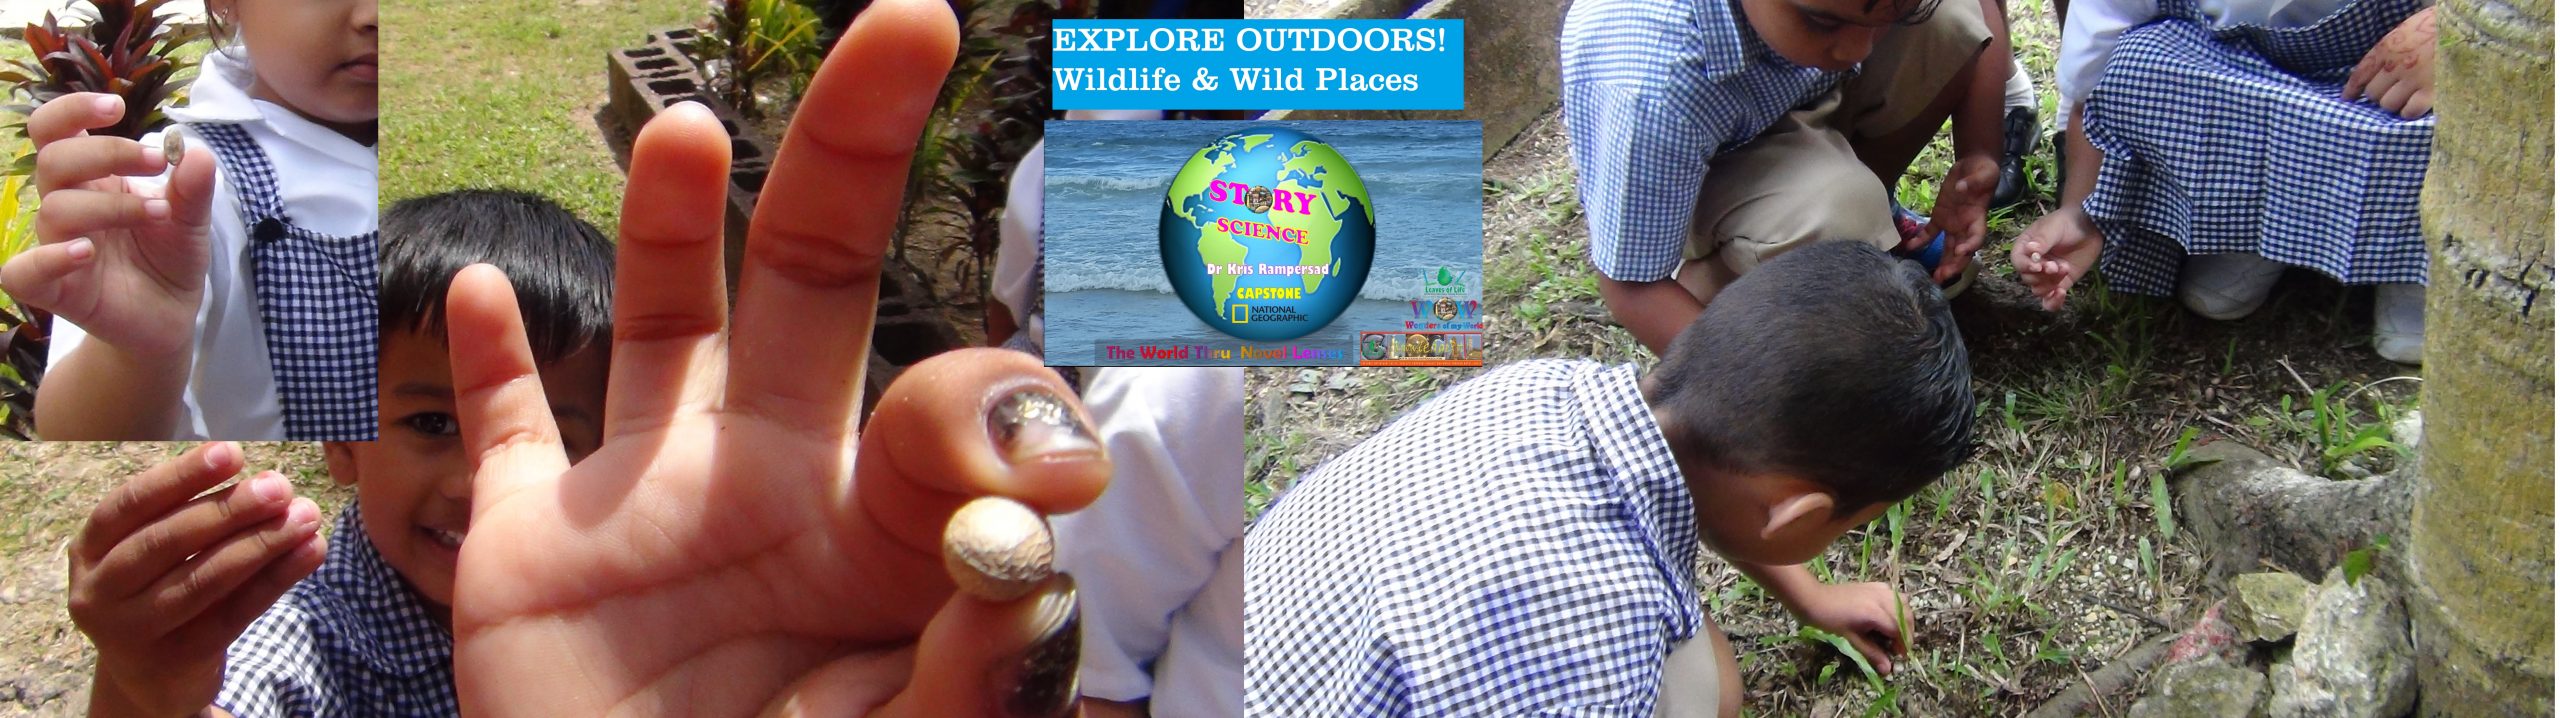 Explore Outdoors With Dr Kris Story Science